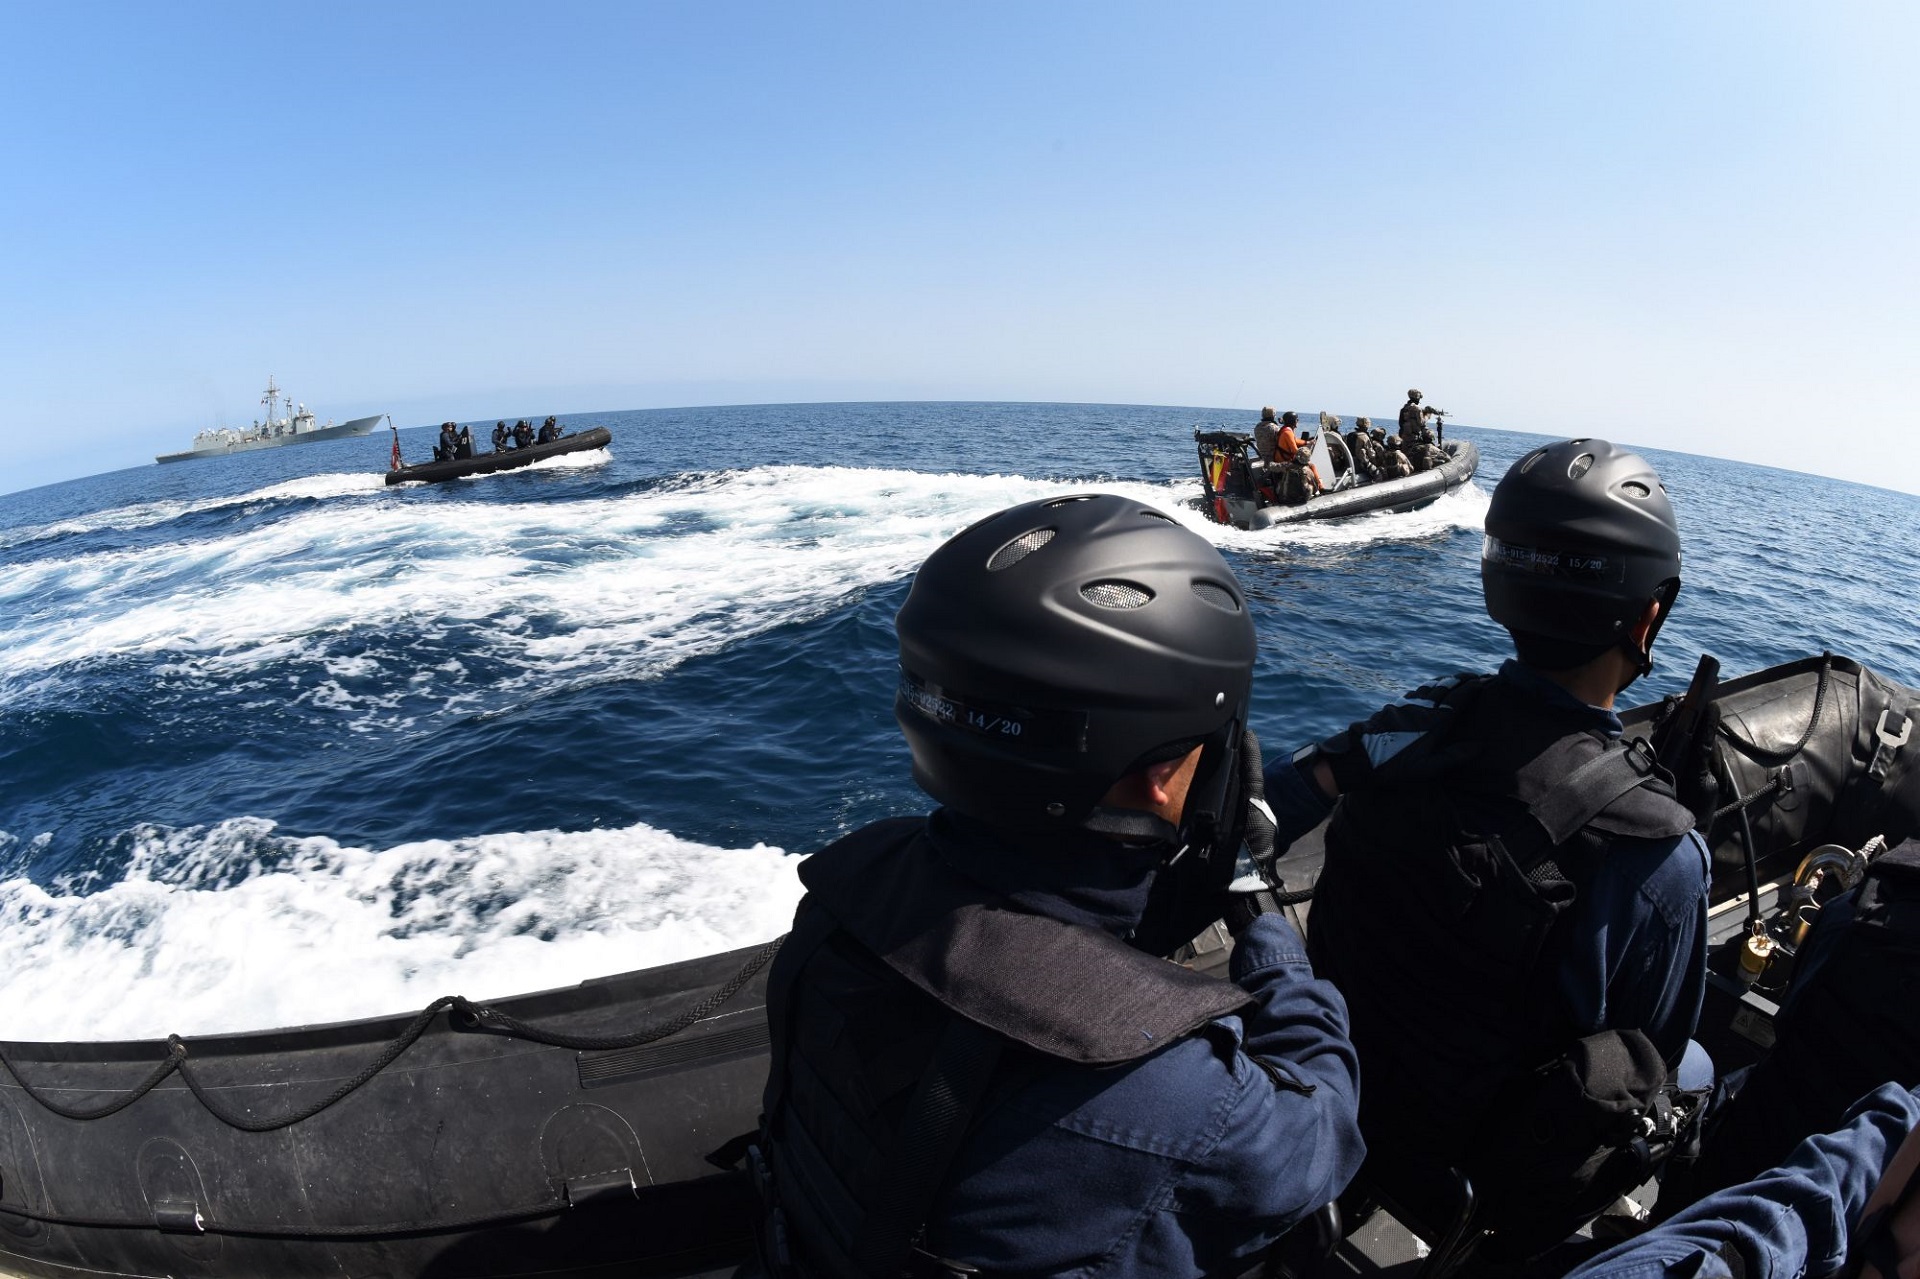 EU NAVFOR Somalia conducts joint naval exercises with Japanese frigate JPS Yugiri and the Maritime Security Centre of the Sultanate of Oman